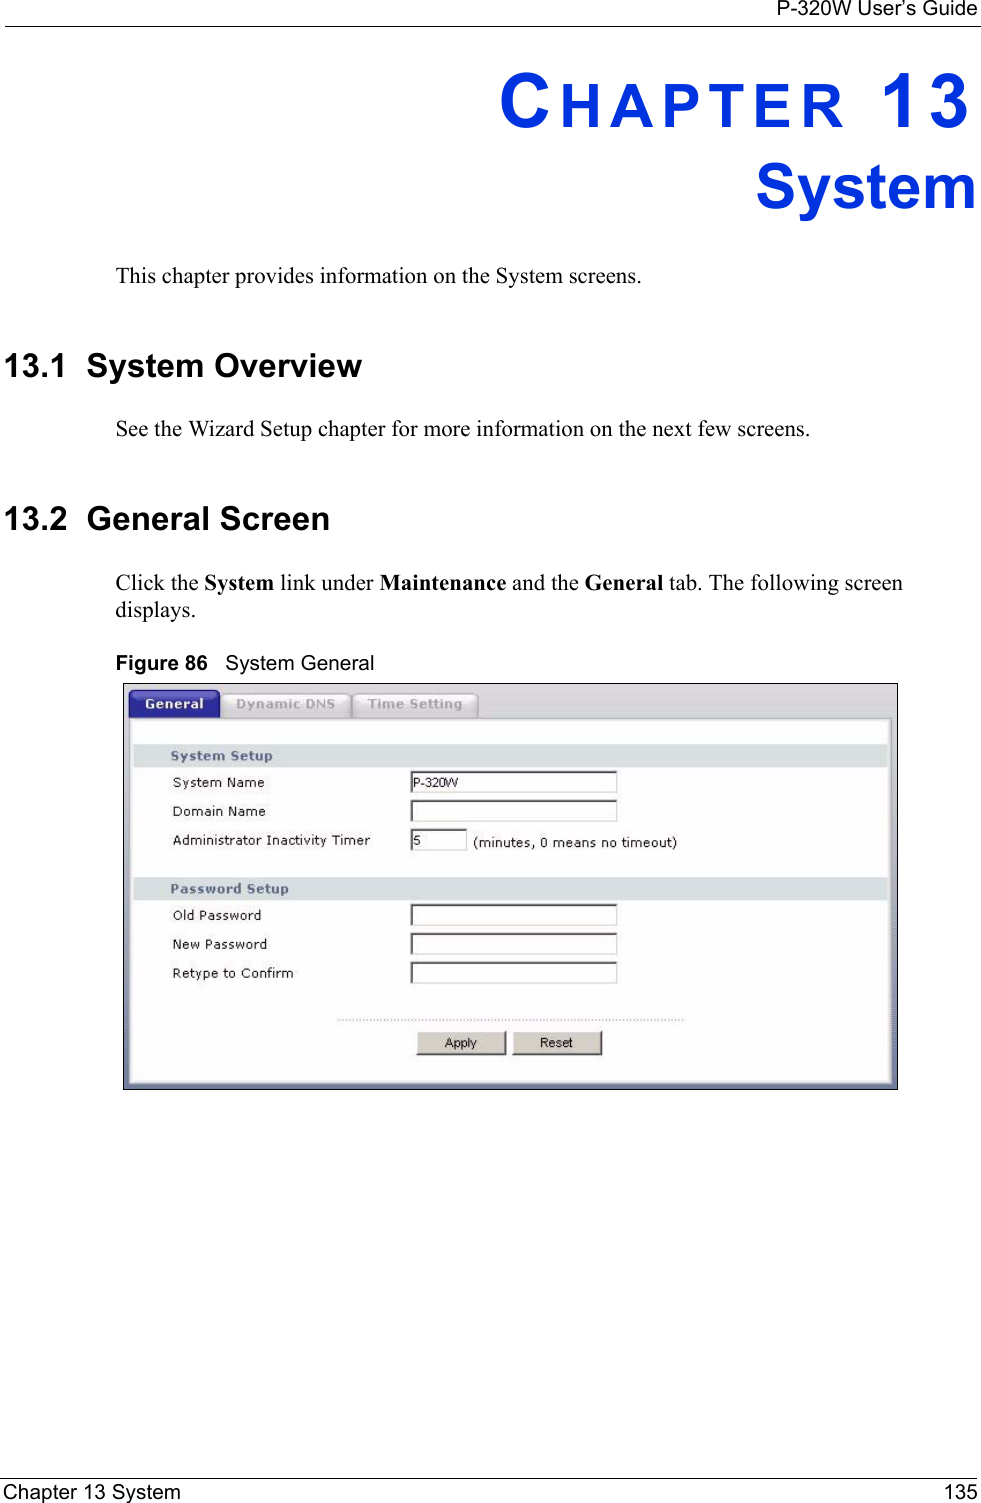 P-320W User’s GuideChapter 13 System 135CHAPTER 13SystemThis chapter provides information on the System screens. 13.1  System OverviewSee the Wizard Setup chapter for more information on the next few screens.13.2  General Screen Click the System link under Maintenance and the General tab. The following screen displays.Figure 86   System General 